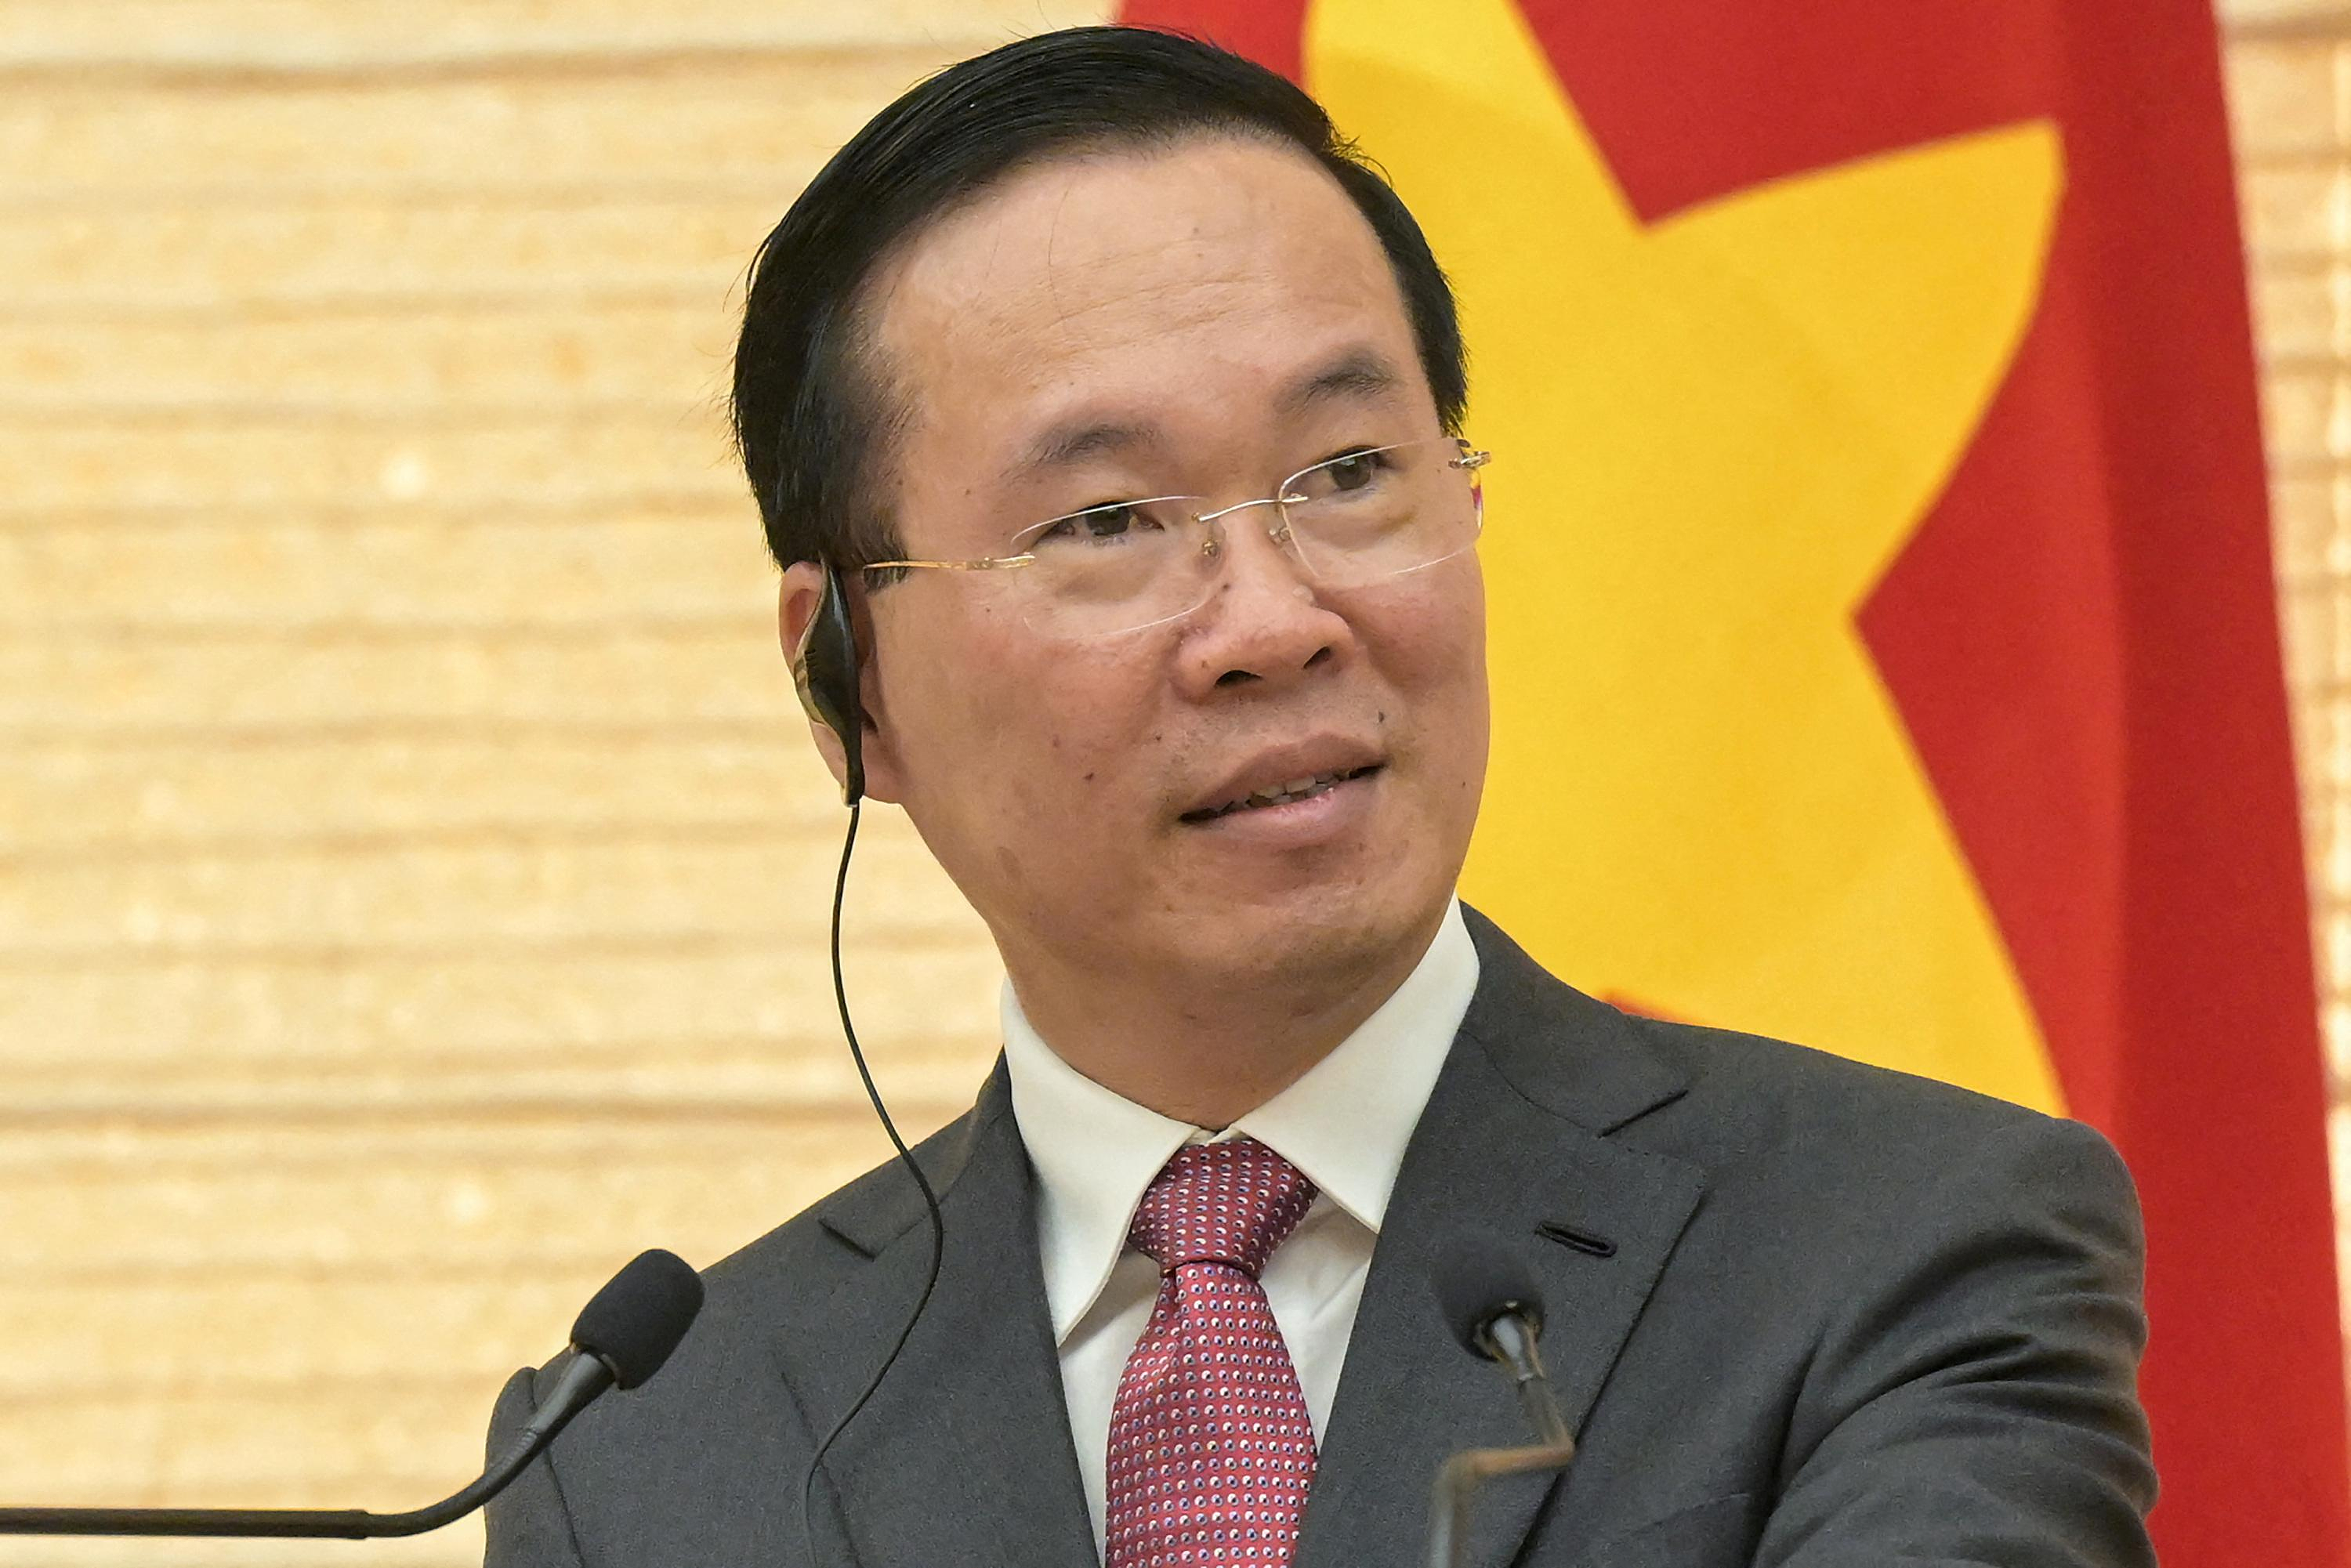 Vietnam: the resignation of a second president in one year weakens the country